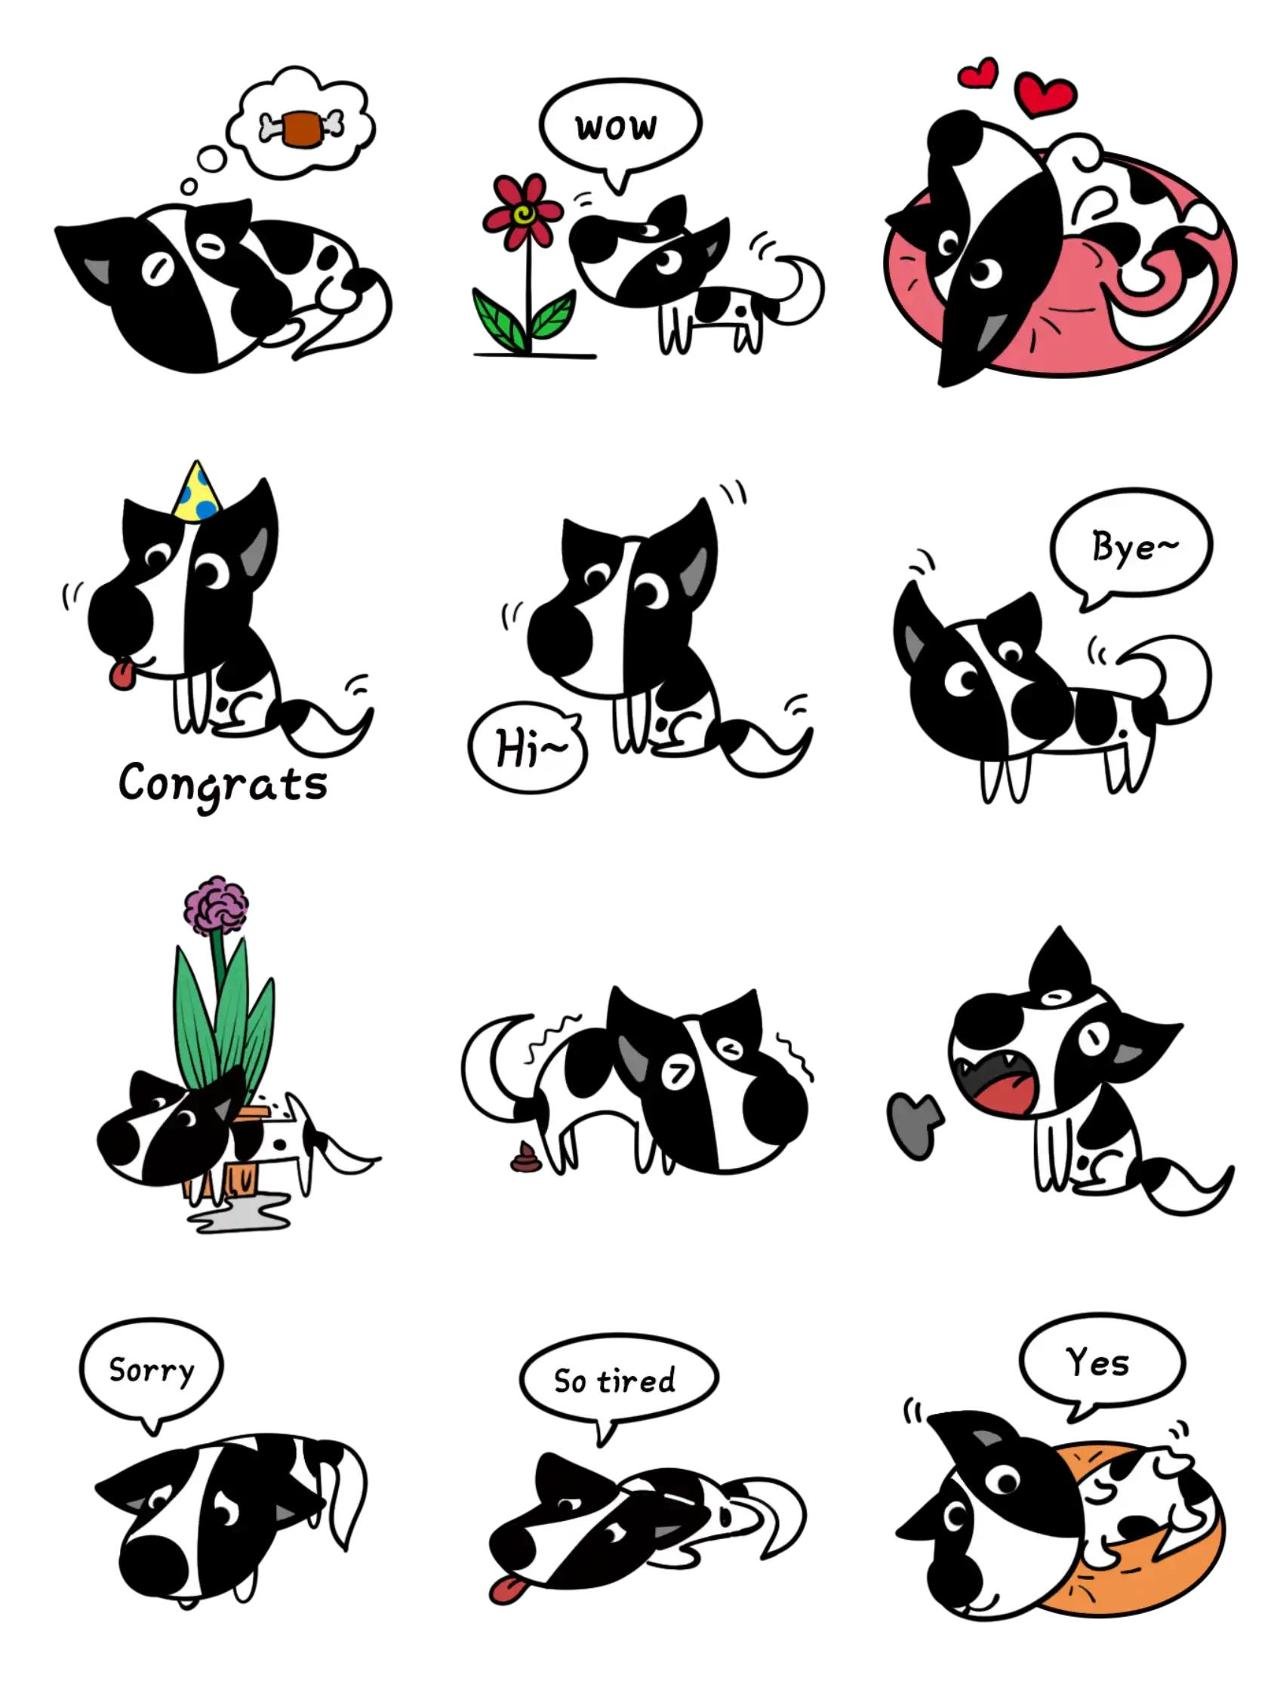 Happy dog Animation/Cartoon,Animals sticker pack for Whatsapp, Telegram, Signal, and others chatting and message apps